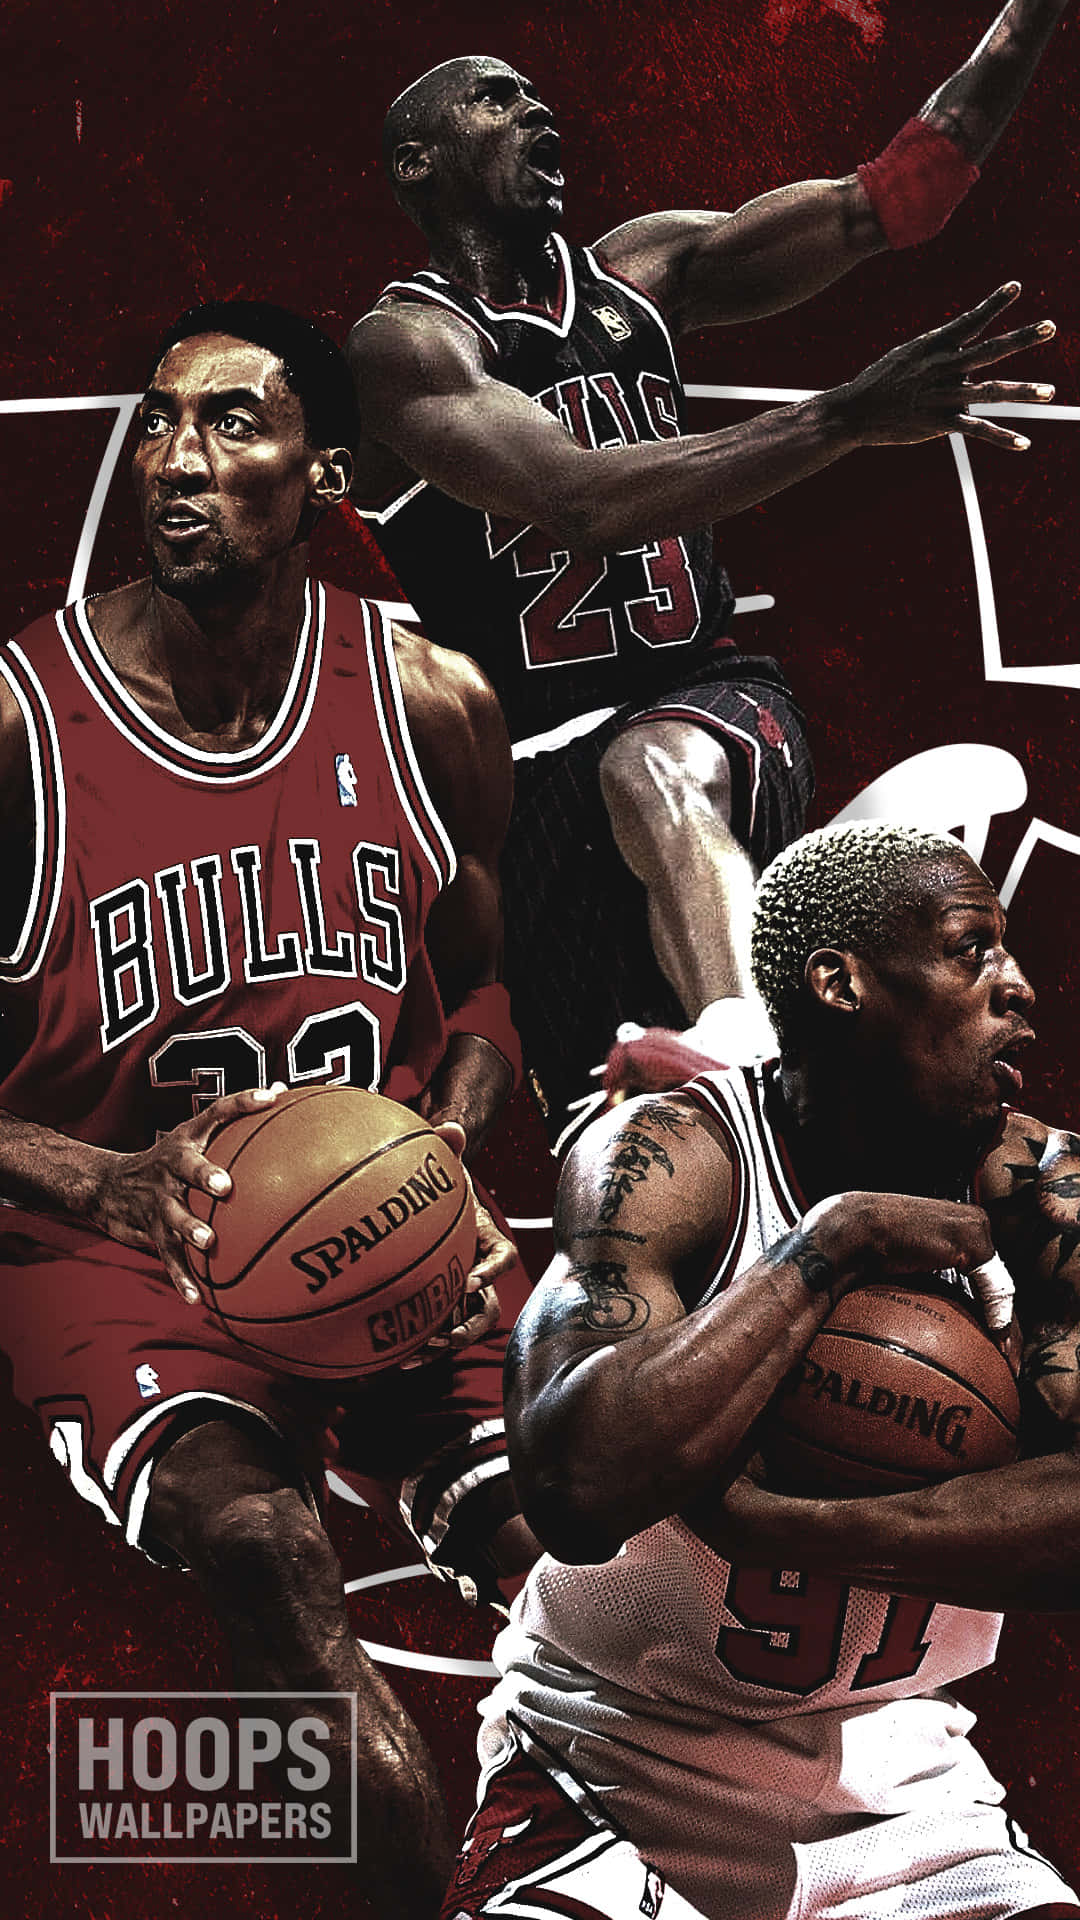 Show Your Loyalty with the Exciting Chicago Bulls iPhone Wallpaper